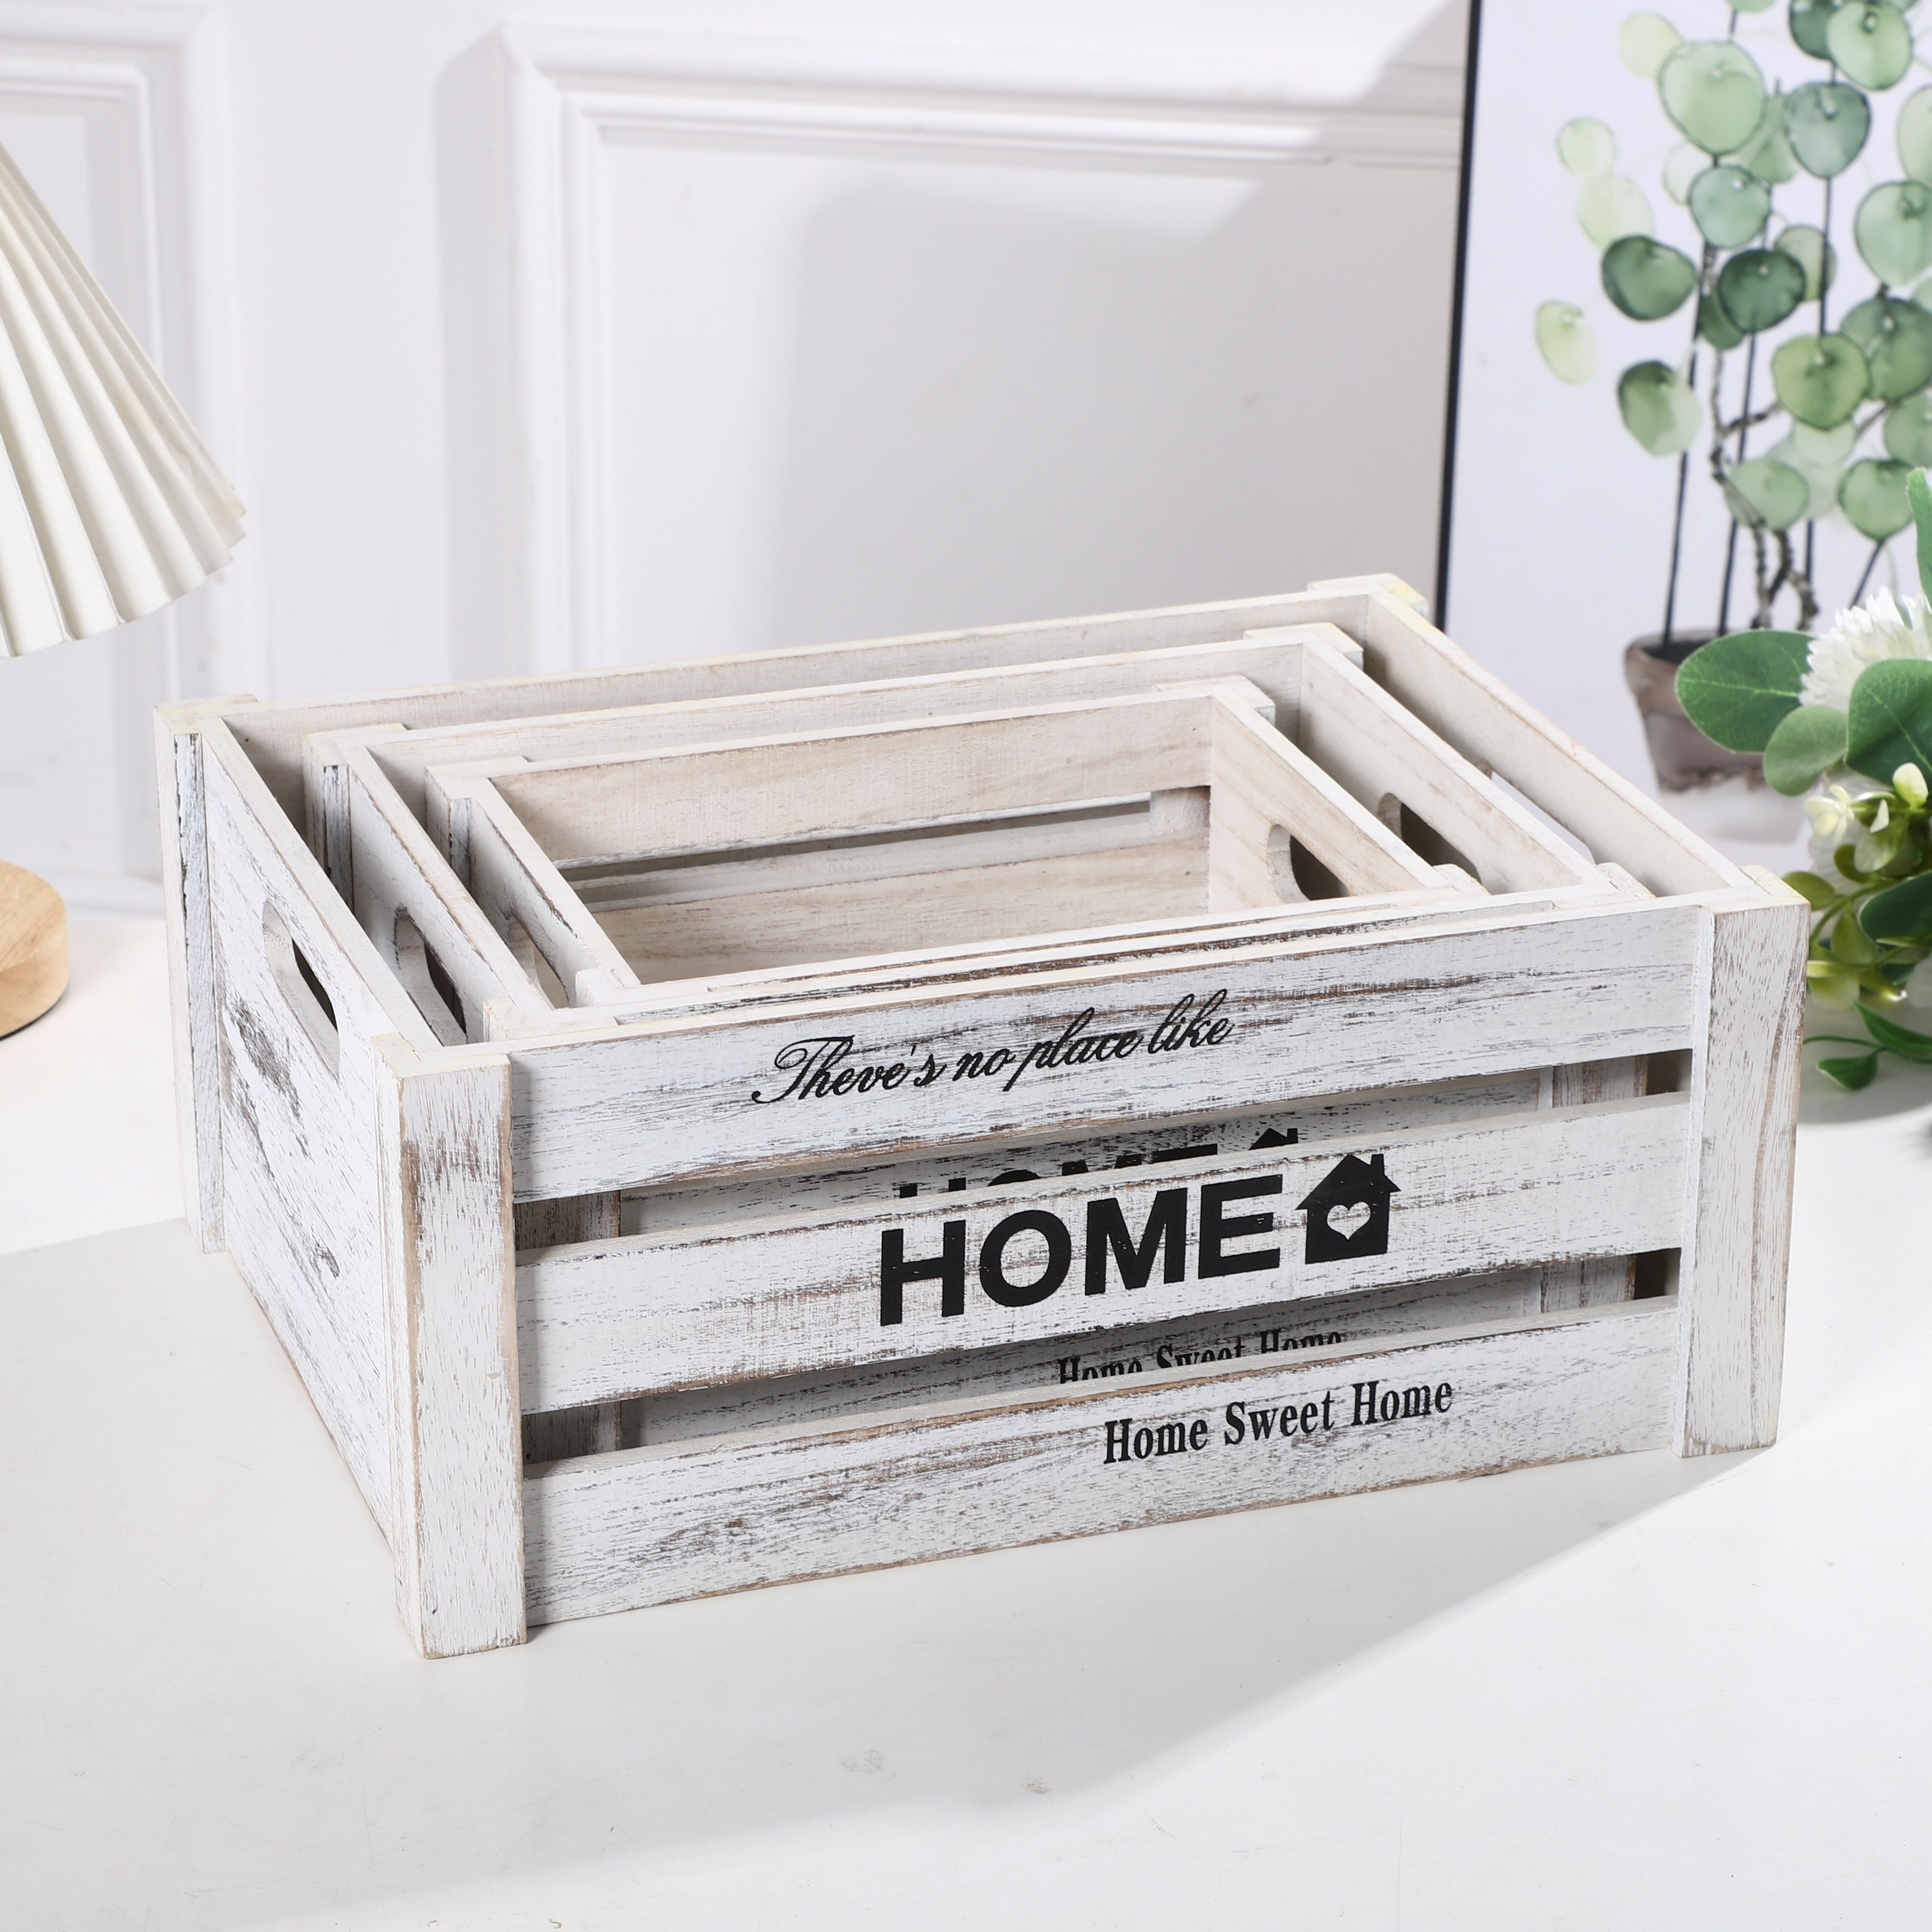 3pcs set rustic white wooden storage crates boho wooden crate box for storage display risers home decorations